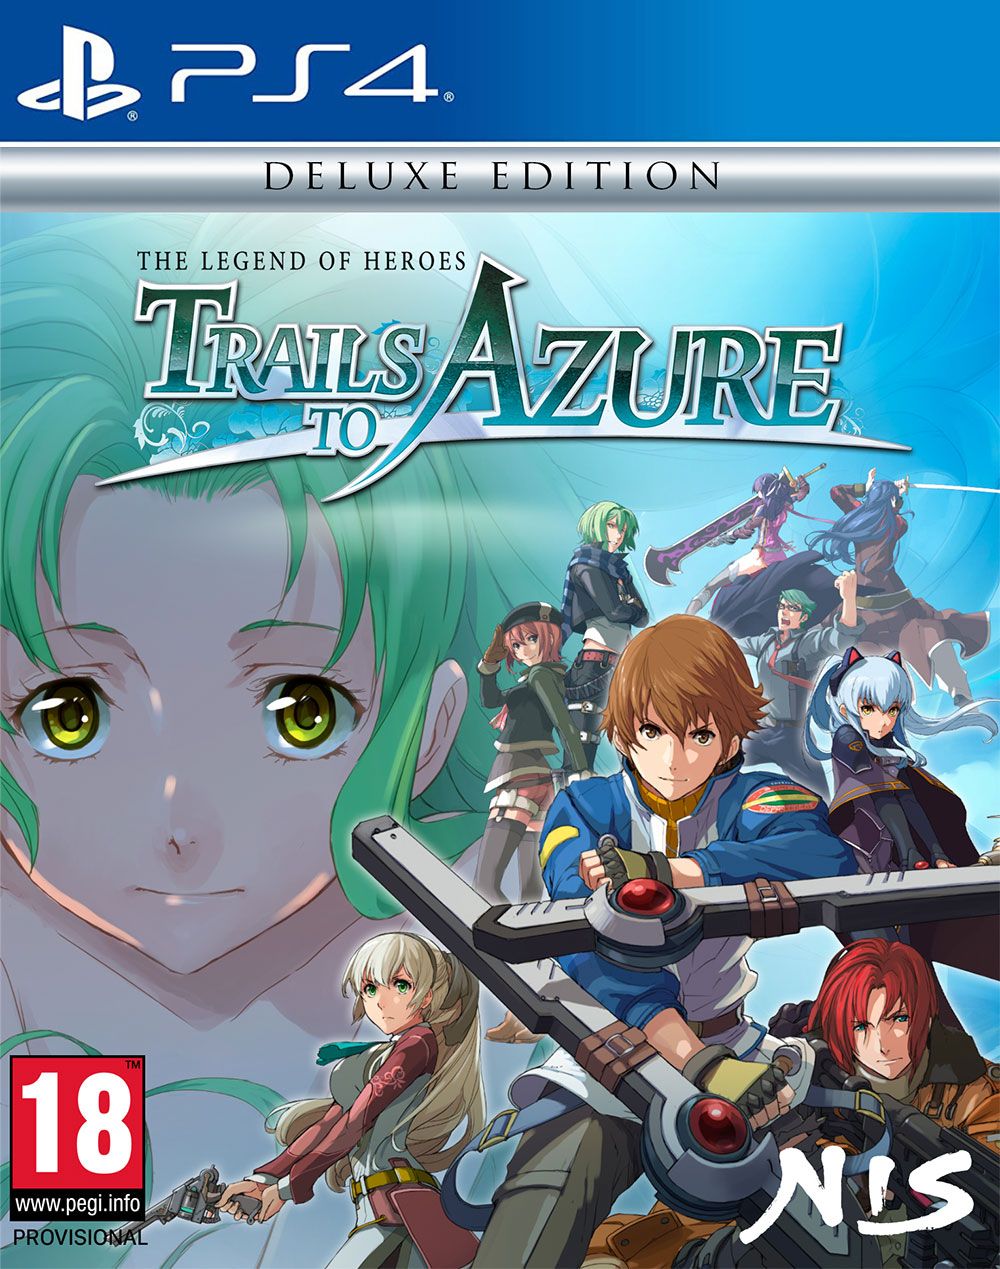 Legend of Heroes, The: Trails to Azure - Deluxe Edition (PS4) | PlayStation 4